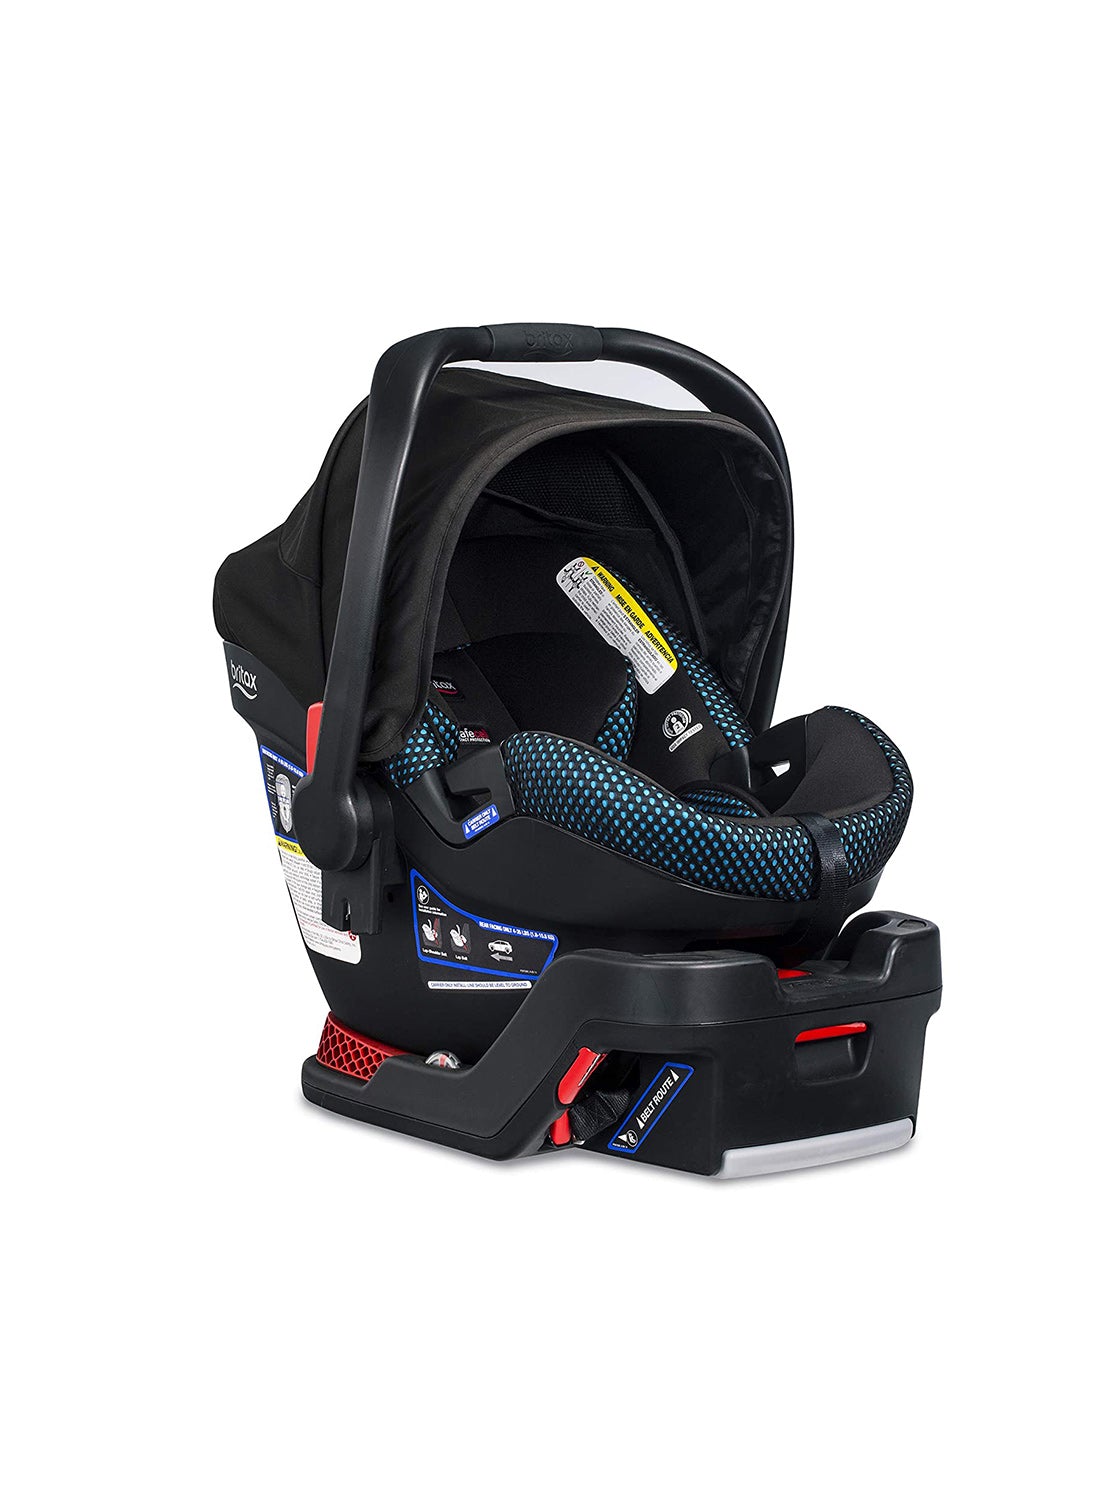 BRITAX B-Lively and B-Safe Ultra Travel System - ANB Baby -$300 - $500